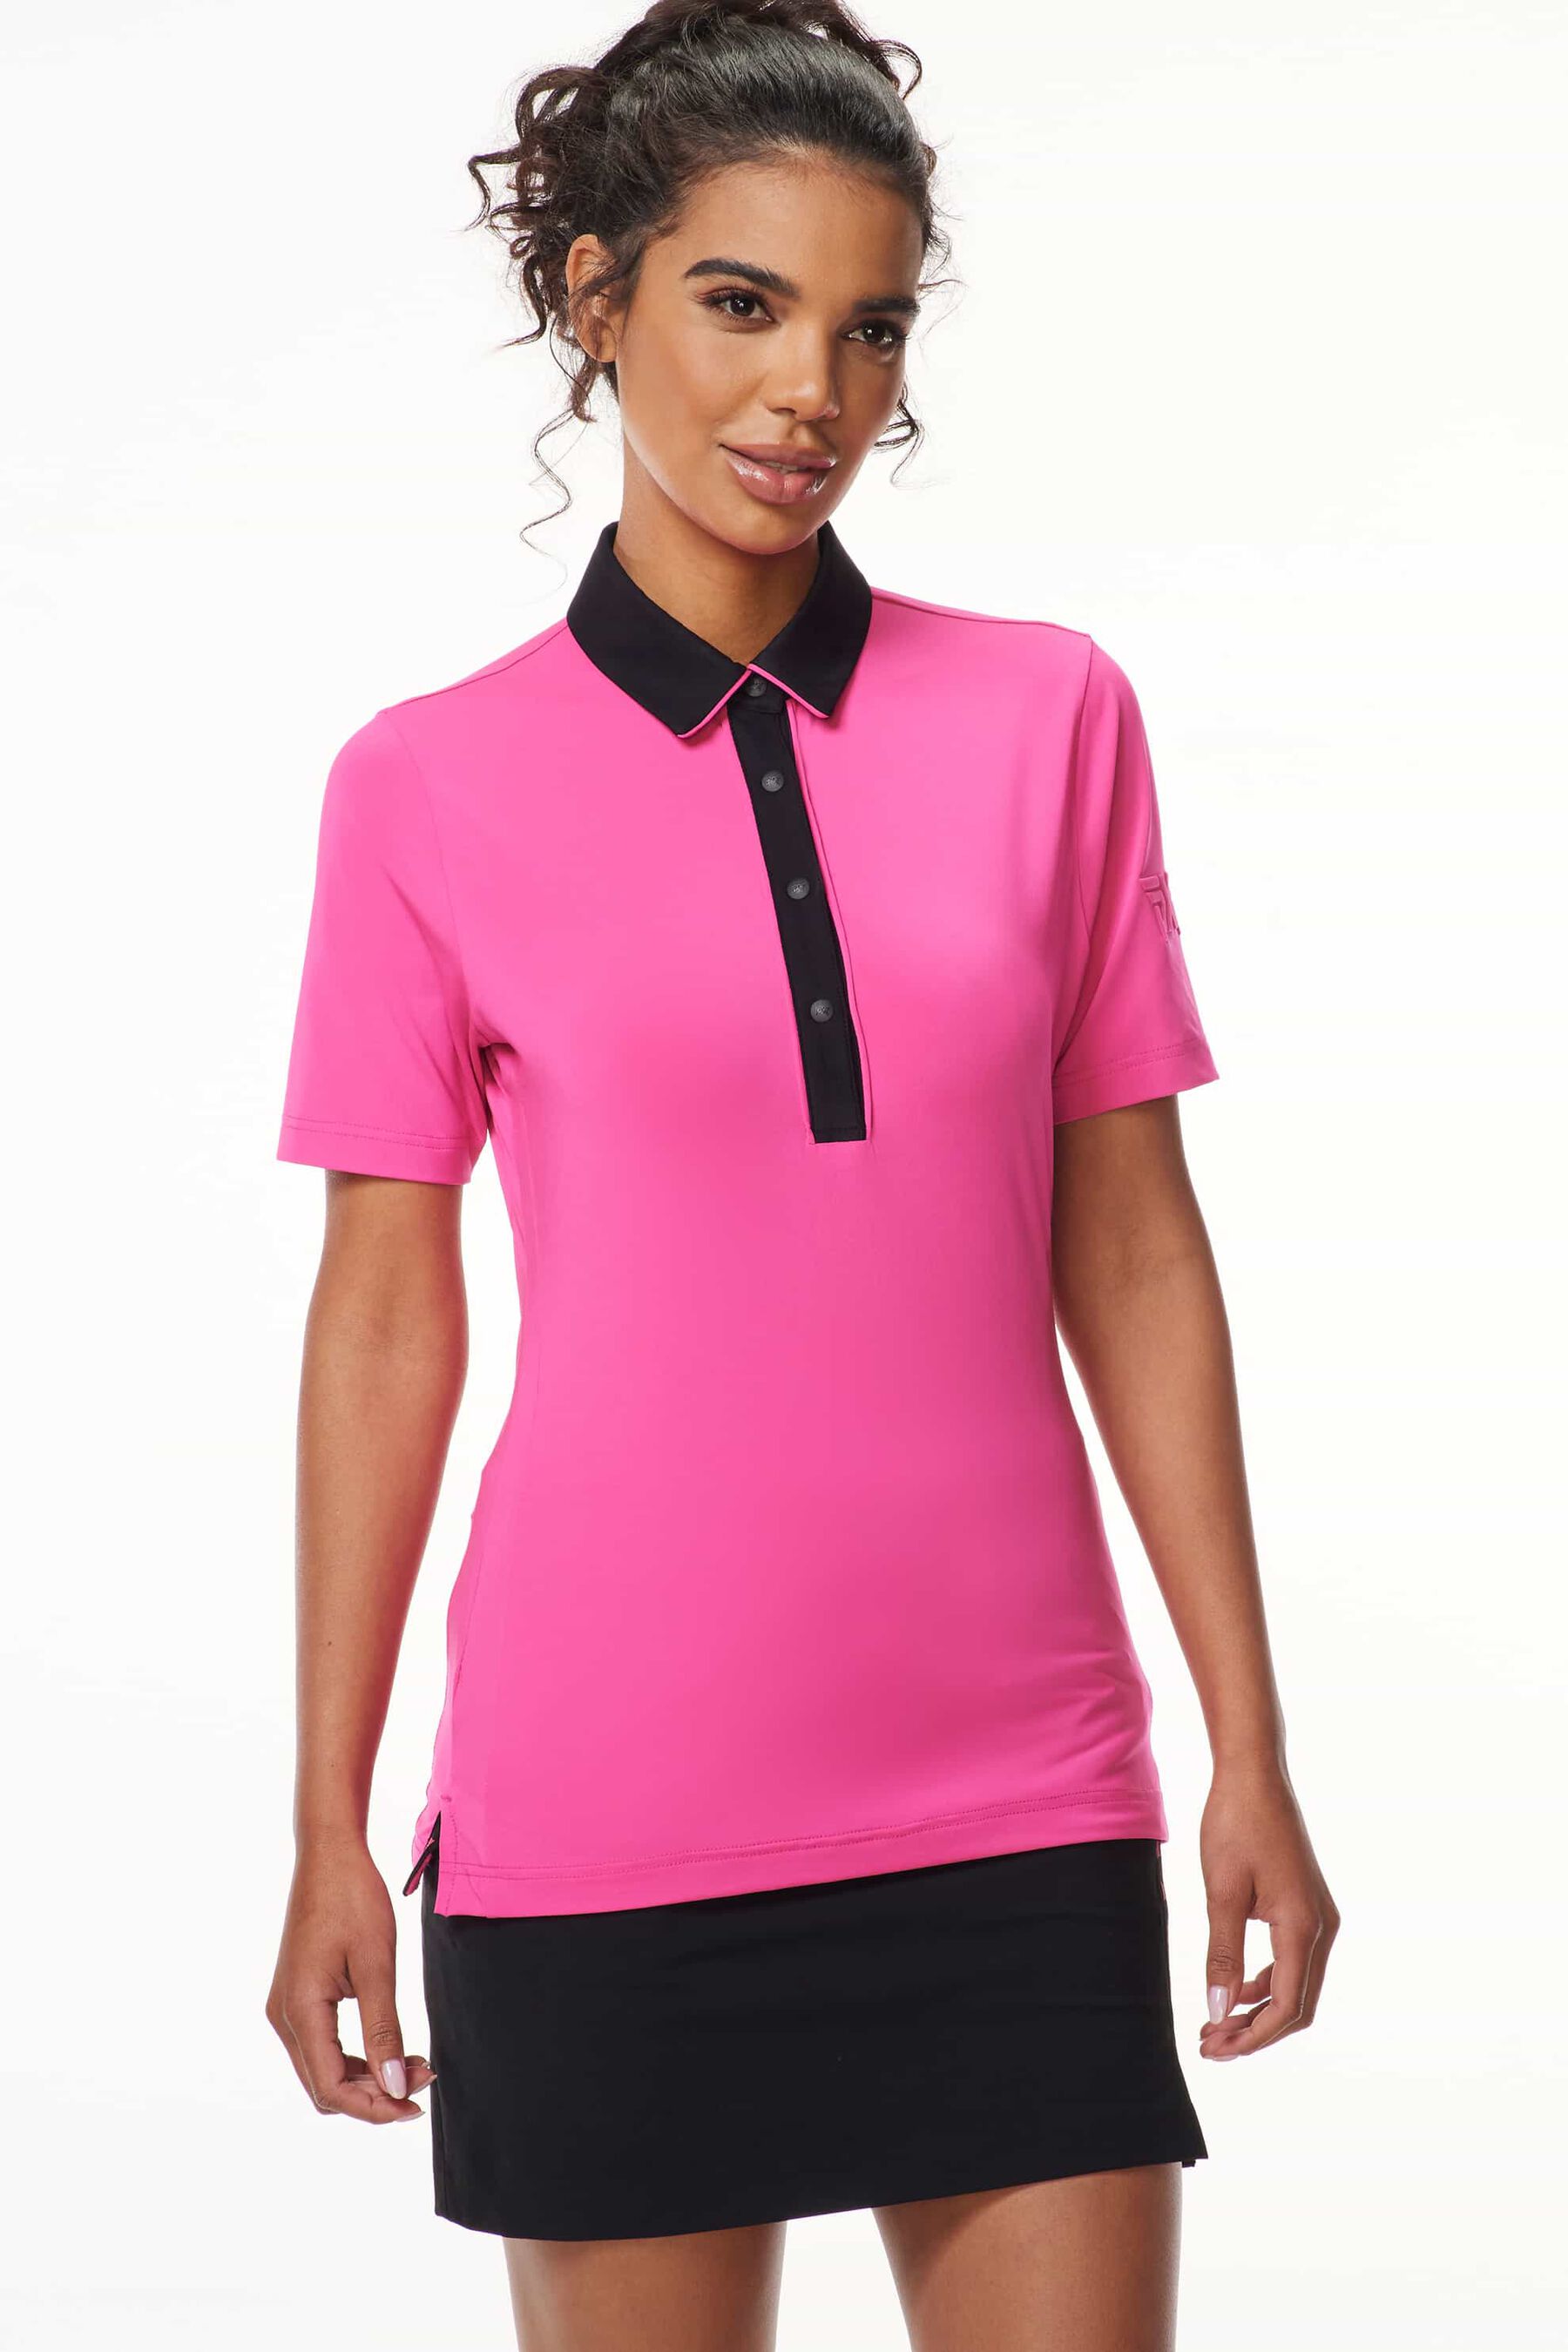 Neon Polo | Shop the Highest Quality Golf Apparel, Gear, Accessories ...